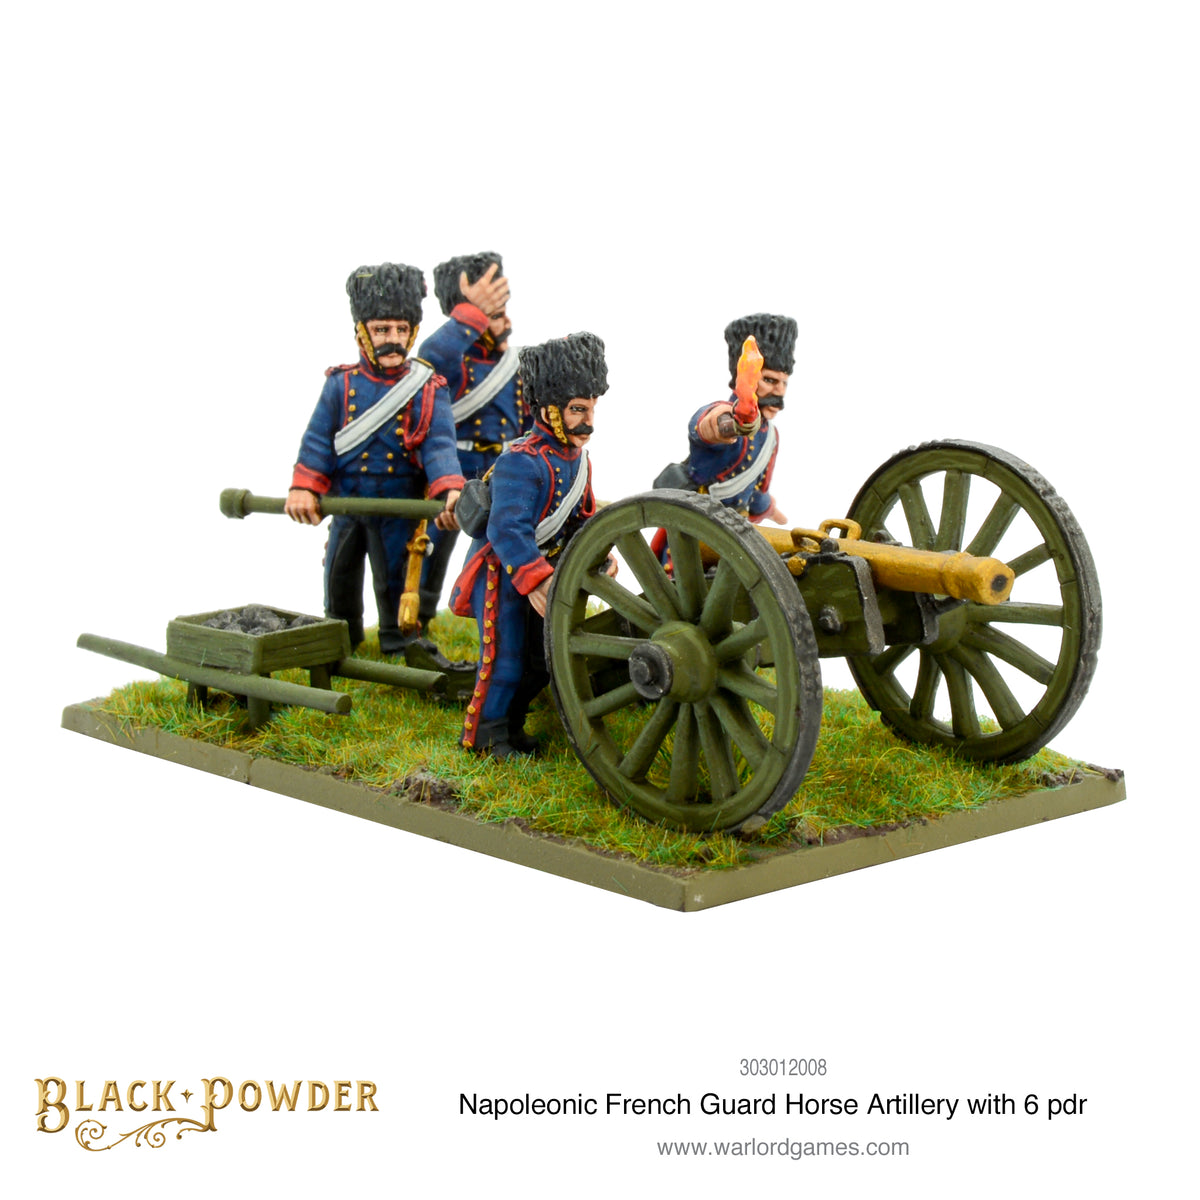 Napoleonic French Guard Horse Artillery with 6 pdr